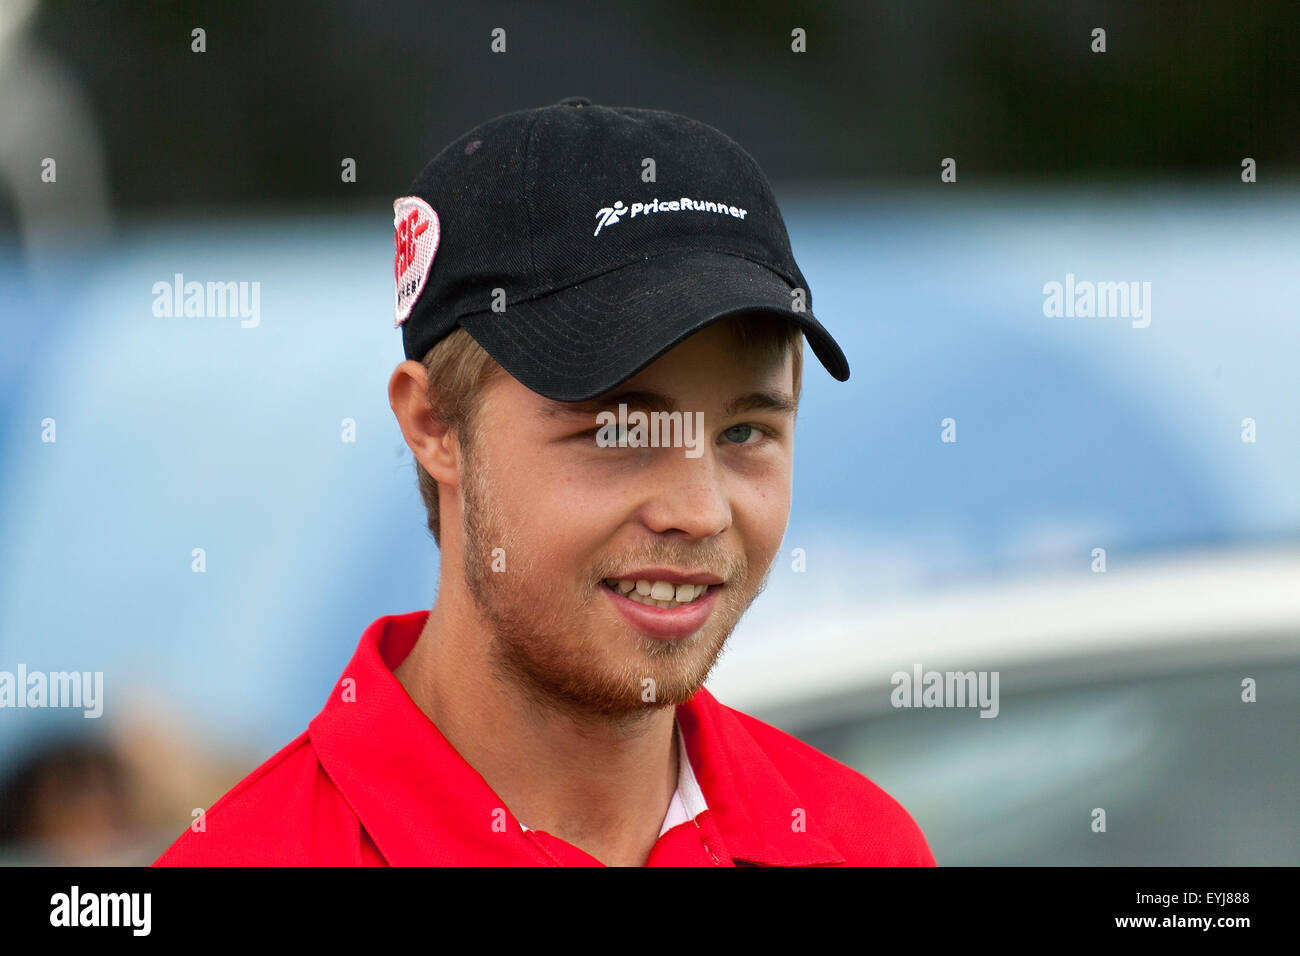 Copenhagen, Denmark, July 30th, 2015: Danish archer Stephan Hansen pictured at the World Archery Championship in Copenhagen. Hansen qualified for the final match in compound bow, which takes place Saturday August 2nd at the parliament square in Copenhagen Credit:  OJPHOTOS/Alamy Live News Stock Photo